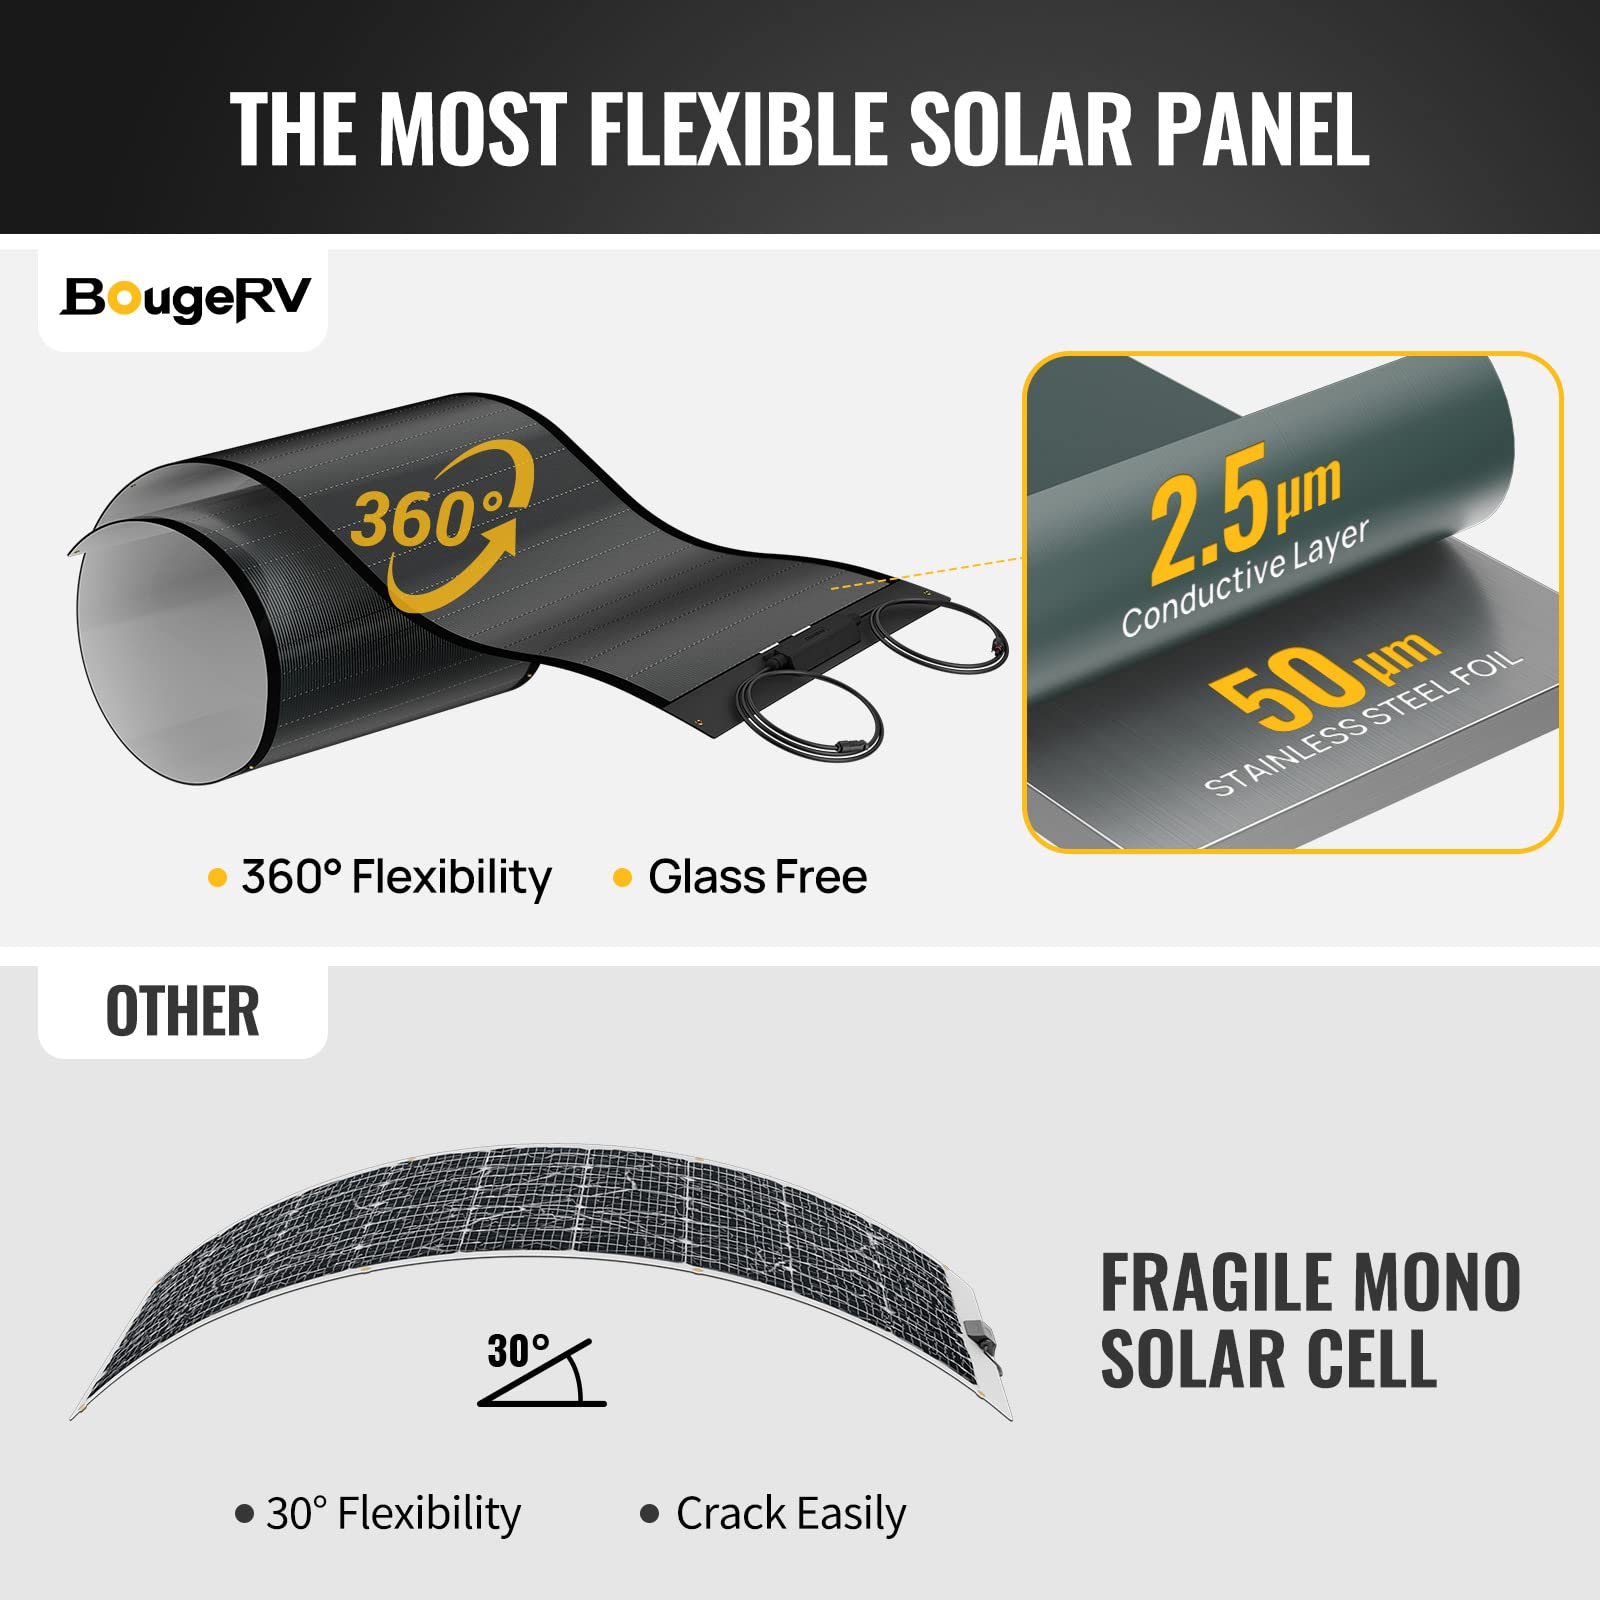 BougeRV Yuma 100W Compact CIGS Thin-Film Flexible Solar Panel, The Most Flexible Solar Panel with Tape for Easy Installation (Compact Version)